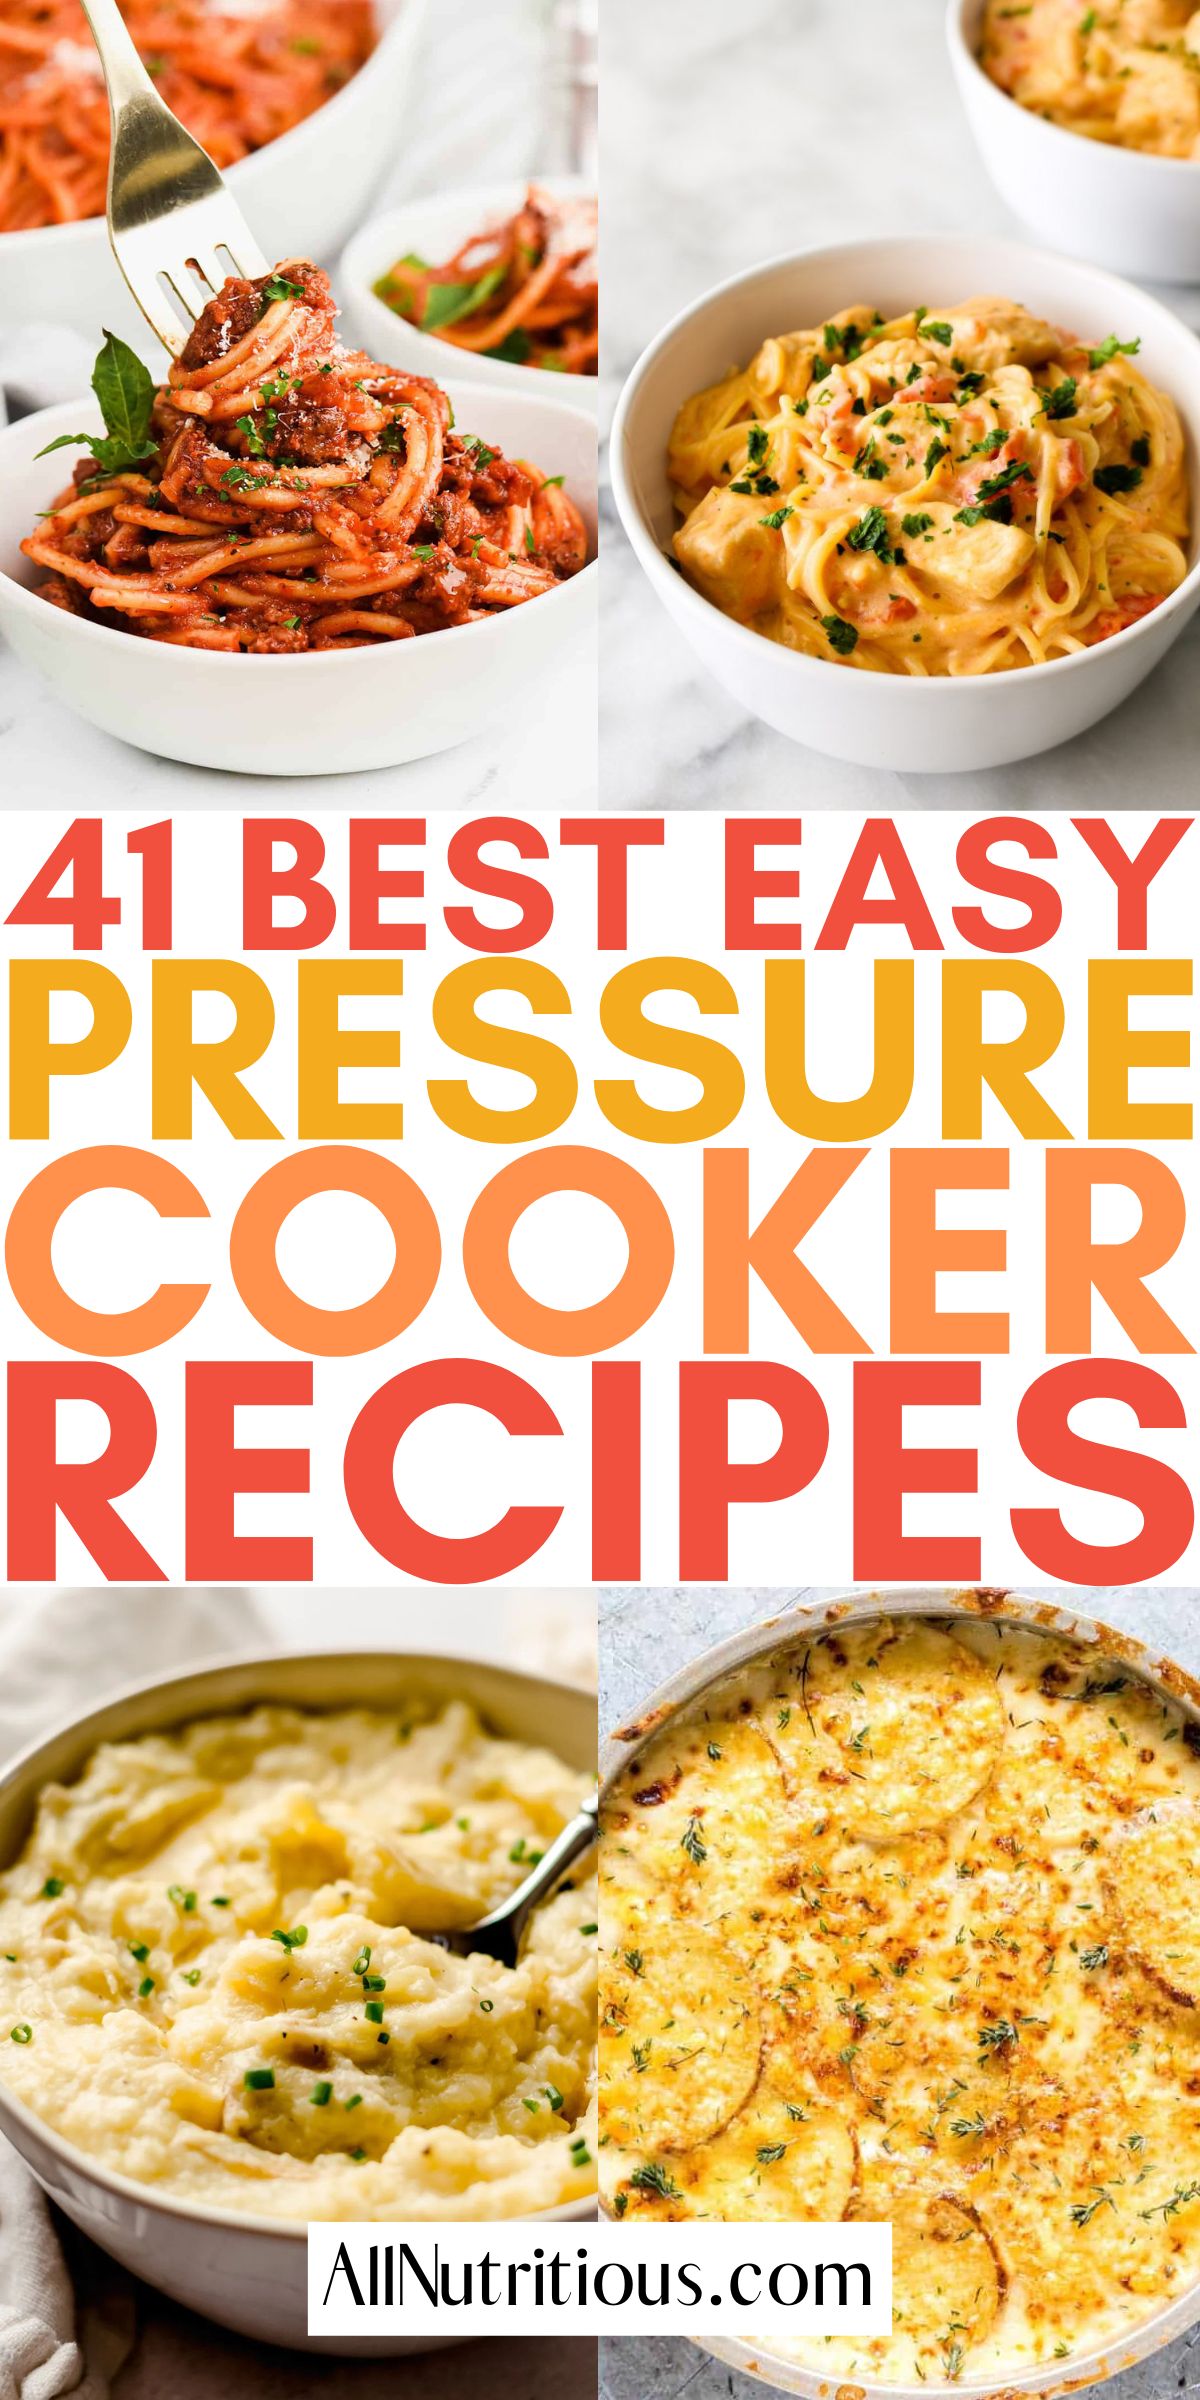 41 Best Pressure Cooker Recipes (Easy & Tasty) – All Nutritious